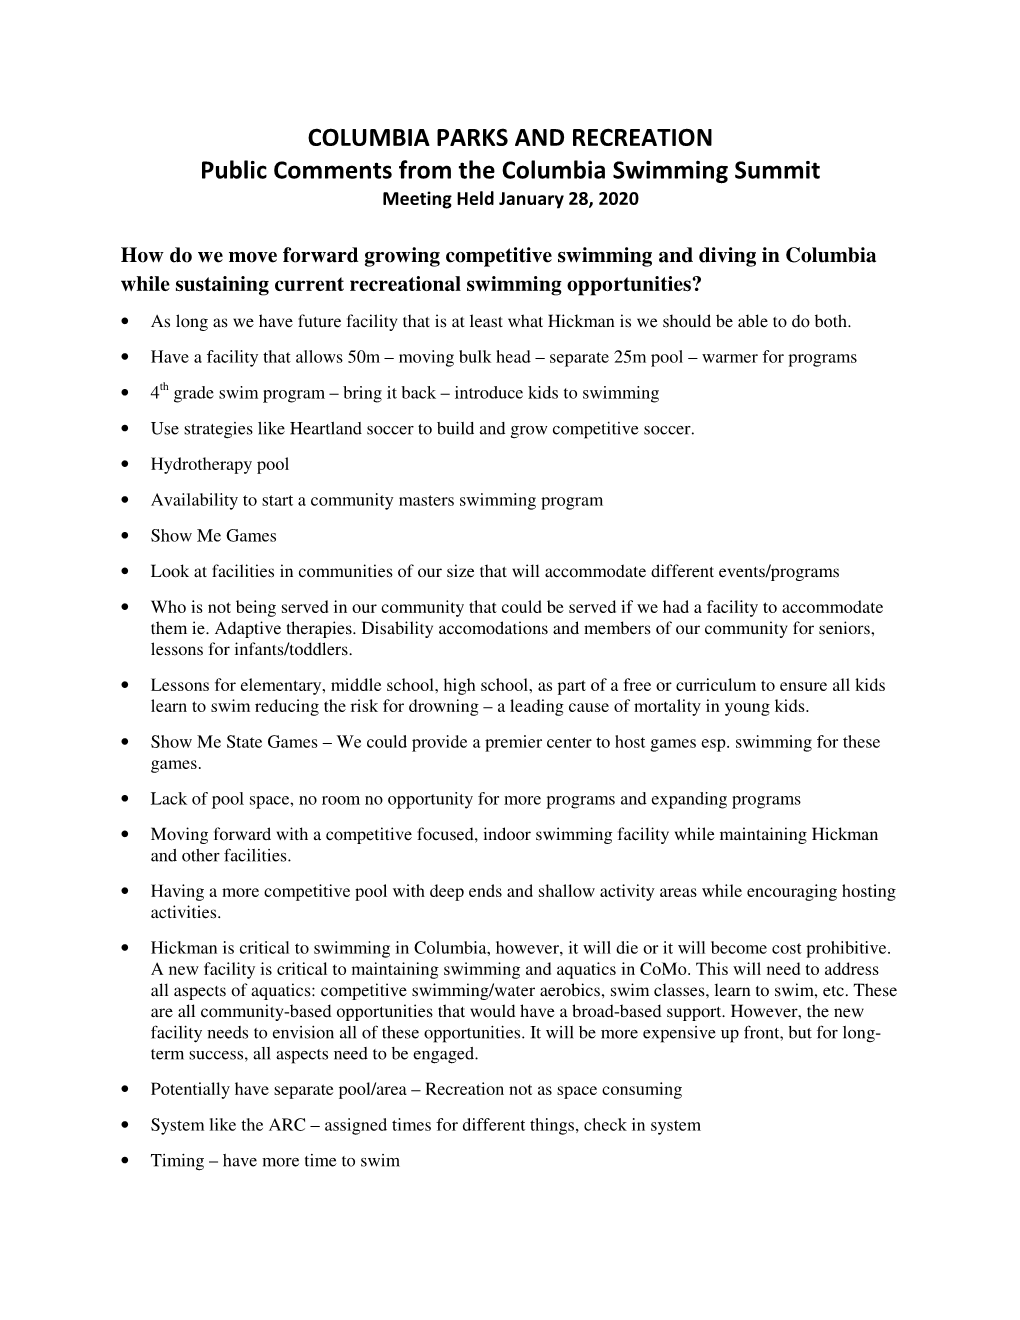 COLUMBIA PARKS and RECREATION Public Comments from the Columbia Swimming Summit Meeting Held January 28, 2020